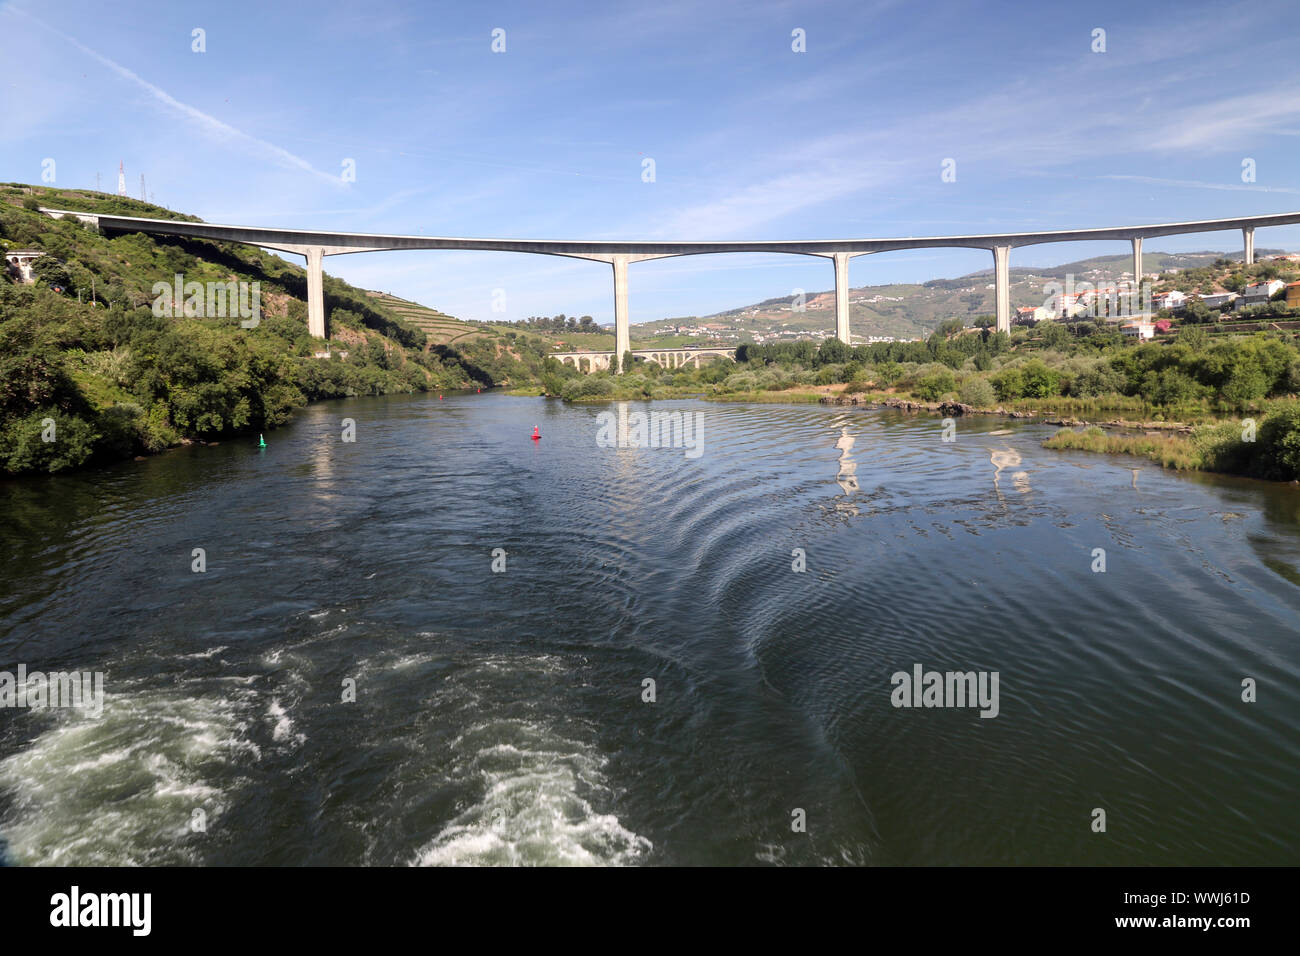 One of the bridges crossing the River Douro in the Douro valley Stock Photo